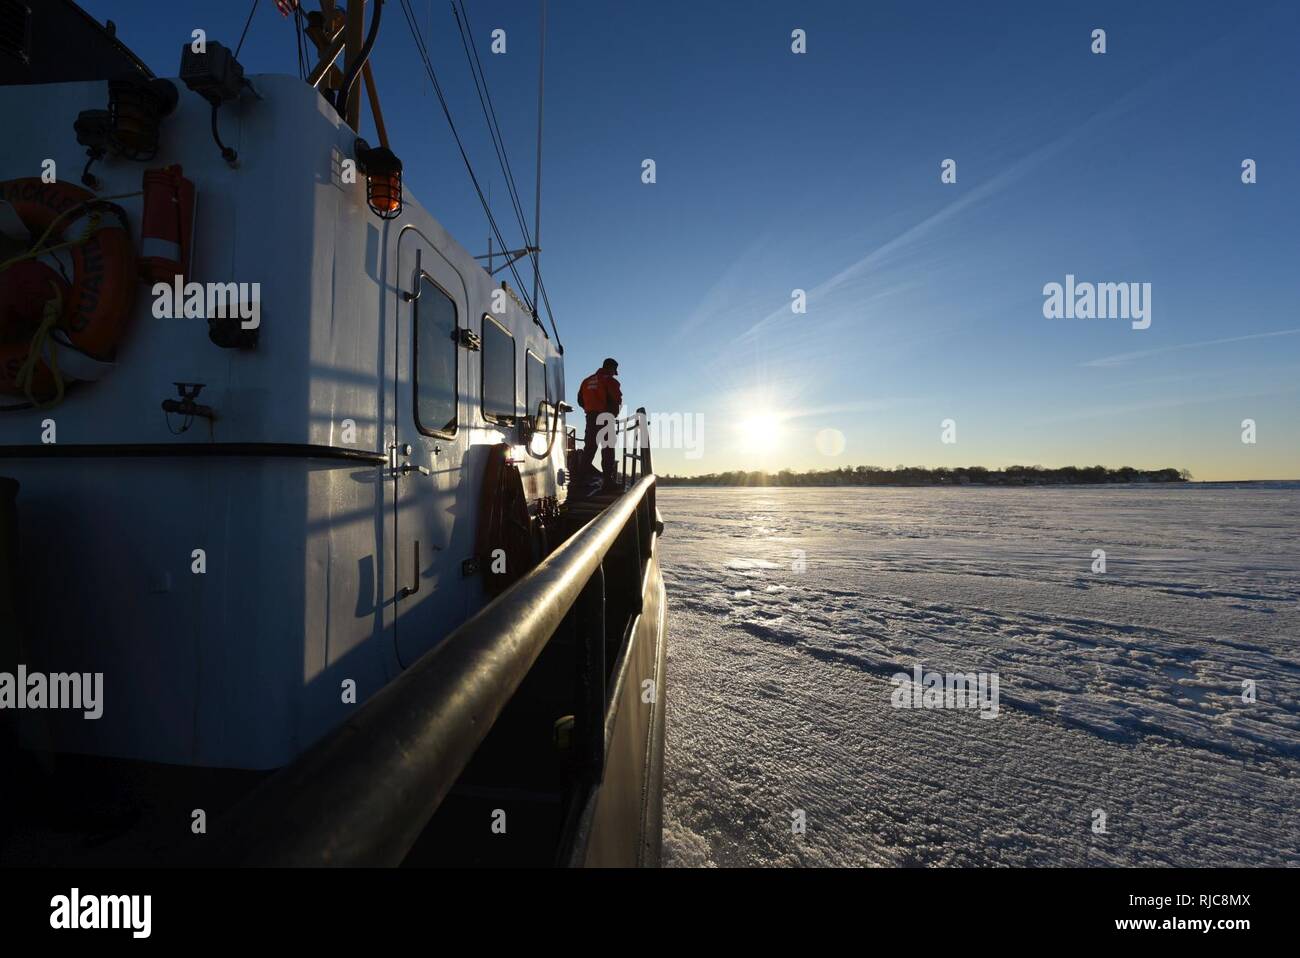 The crew of Coast Guard Cutter Shackle, a 65-foot Small Harbor Tug, breaks ice Wednesday, Jan. 10, 2018 near Logan International Airport in Boston Harbor. Shackle is capable of breaking up to 12 inches of ice. Stock Photo